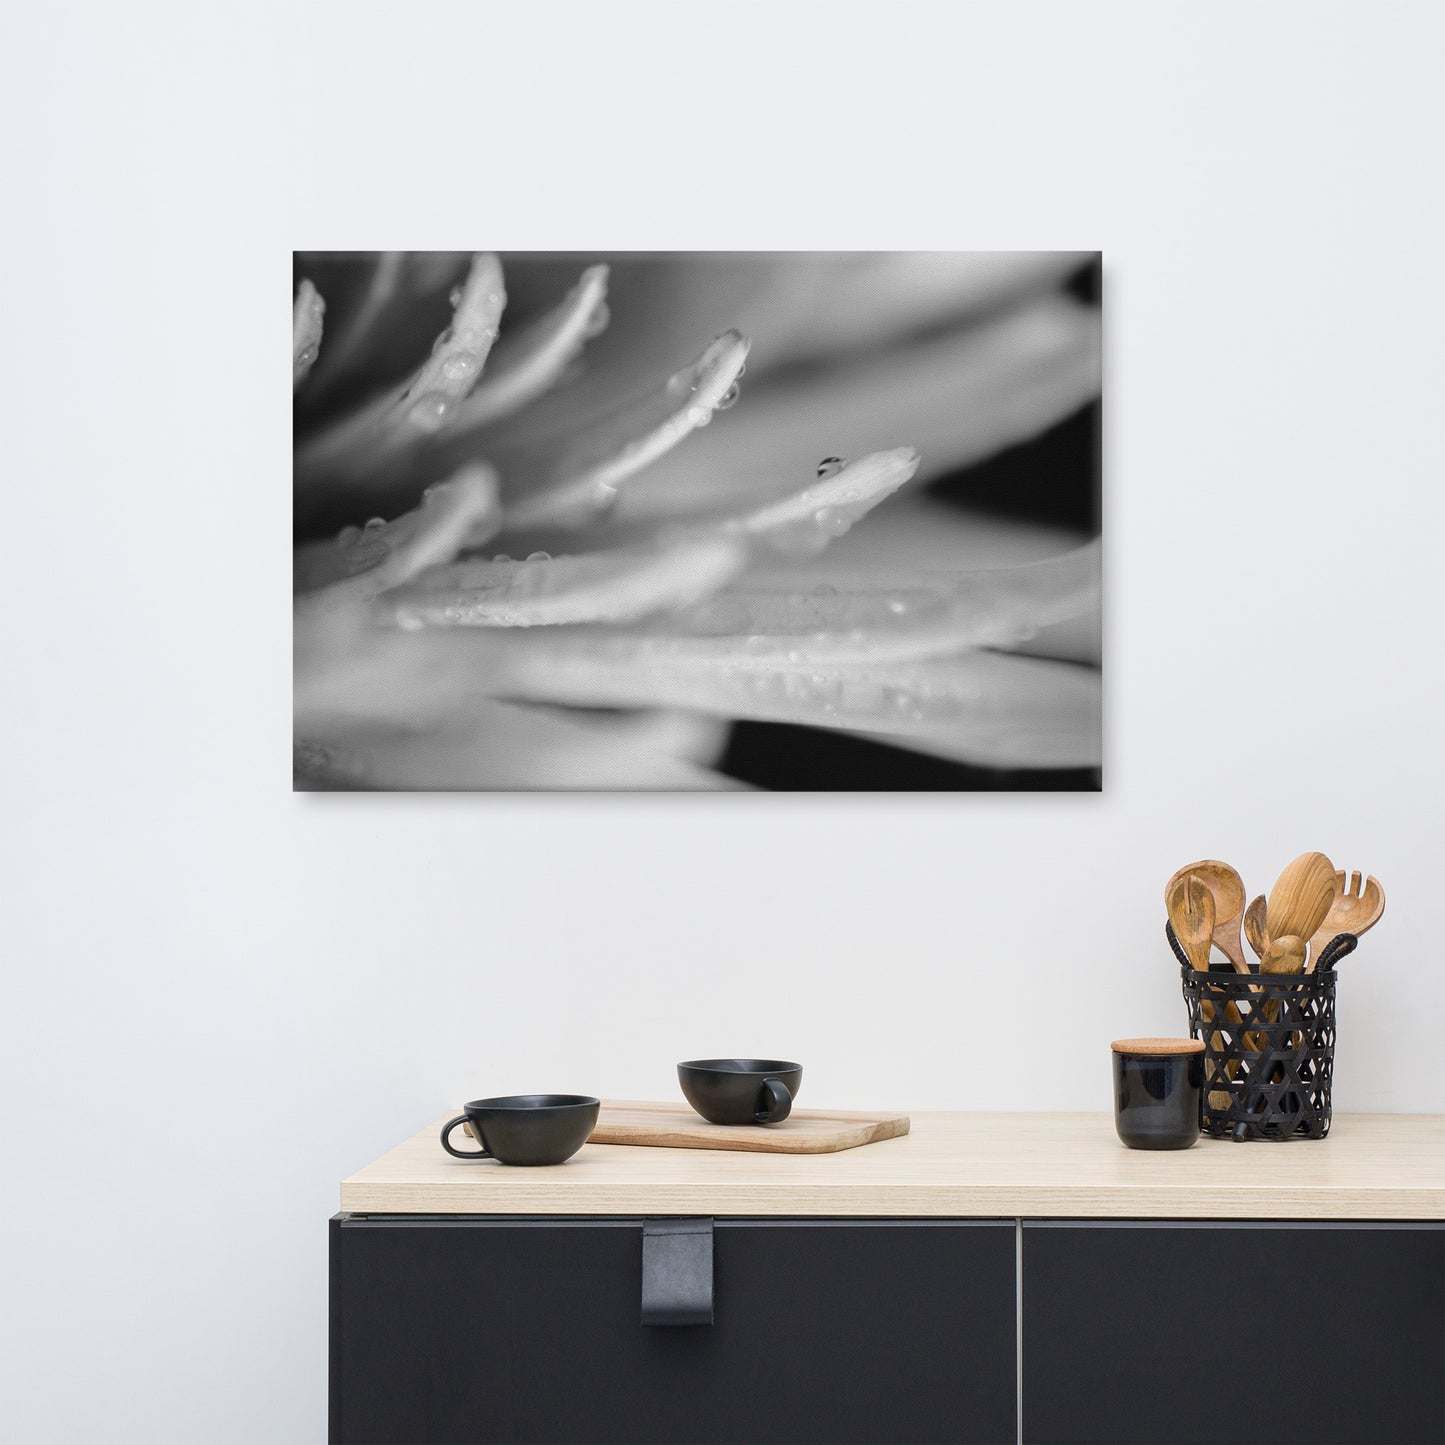 Droplets on Petals Black and White Floral Nature Canvas Wall Art Prints